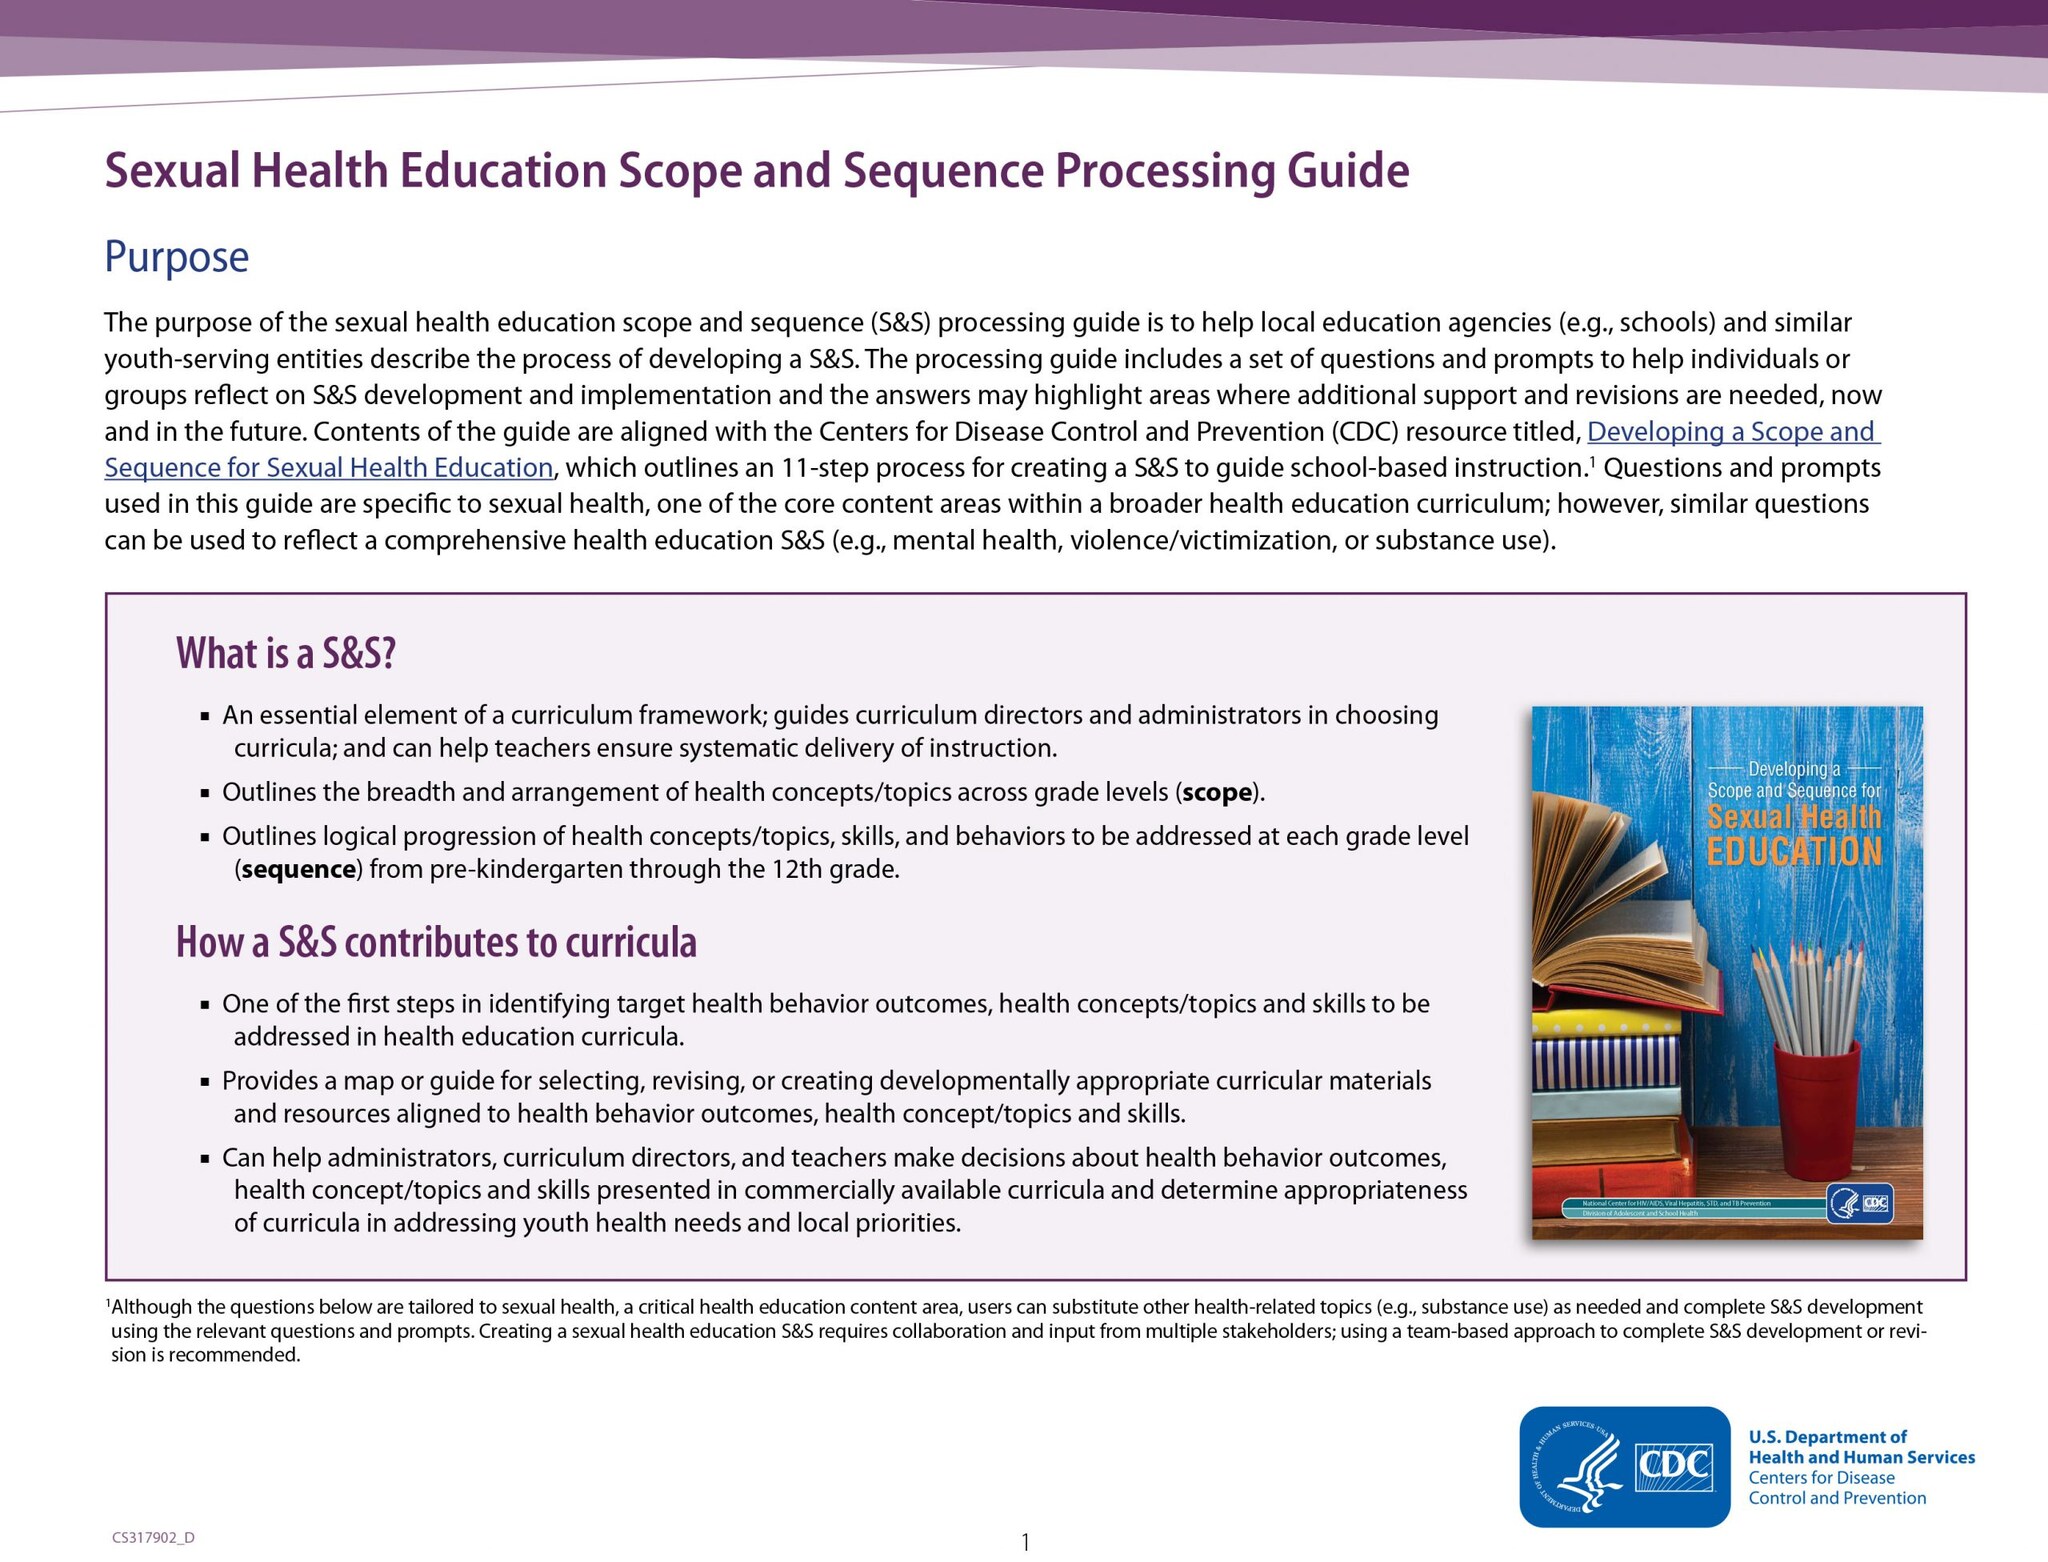 Sexual Health Education Scope and Sequence Processing Guide fact sheet cover